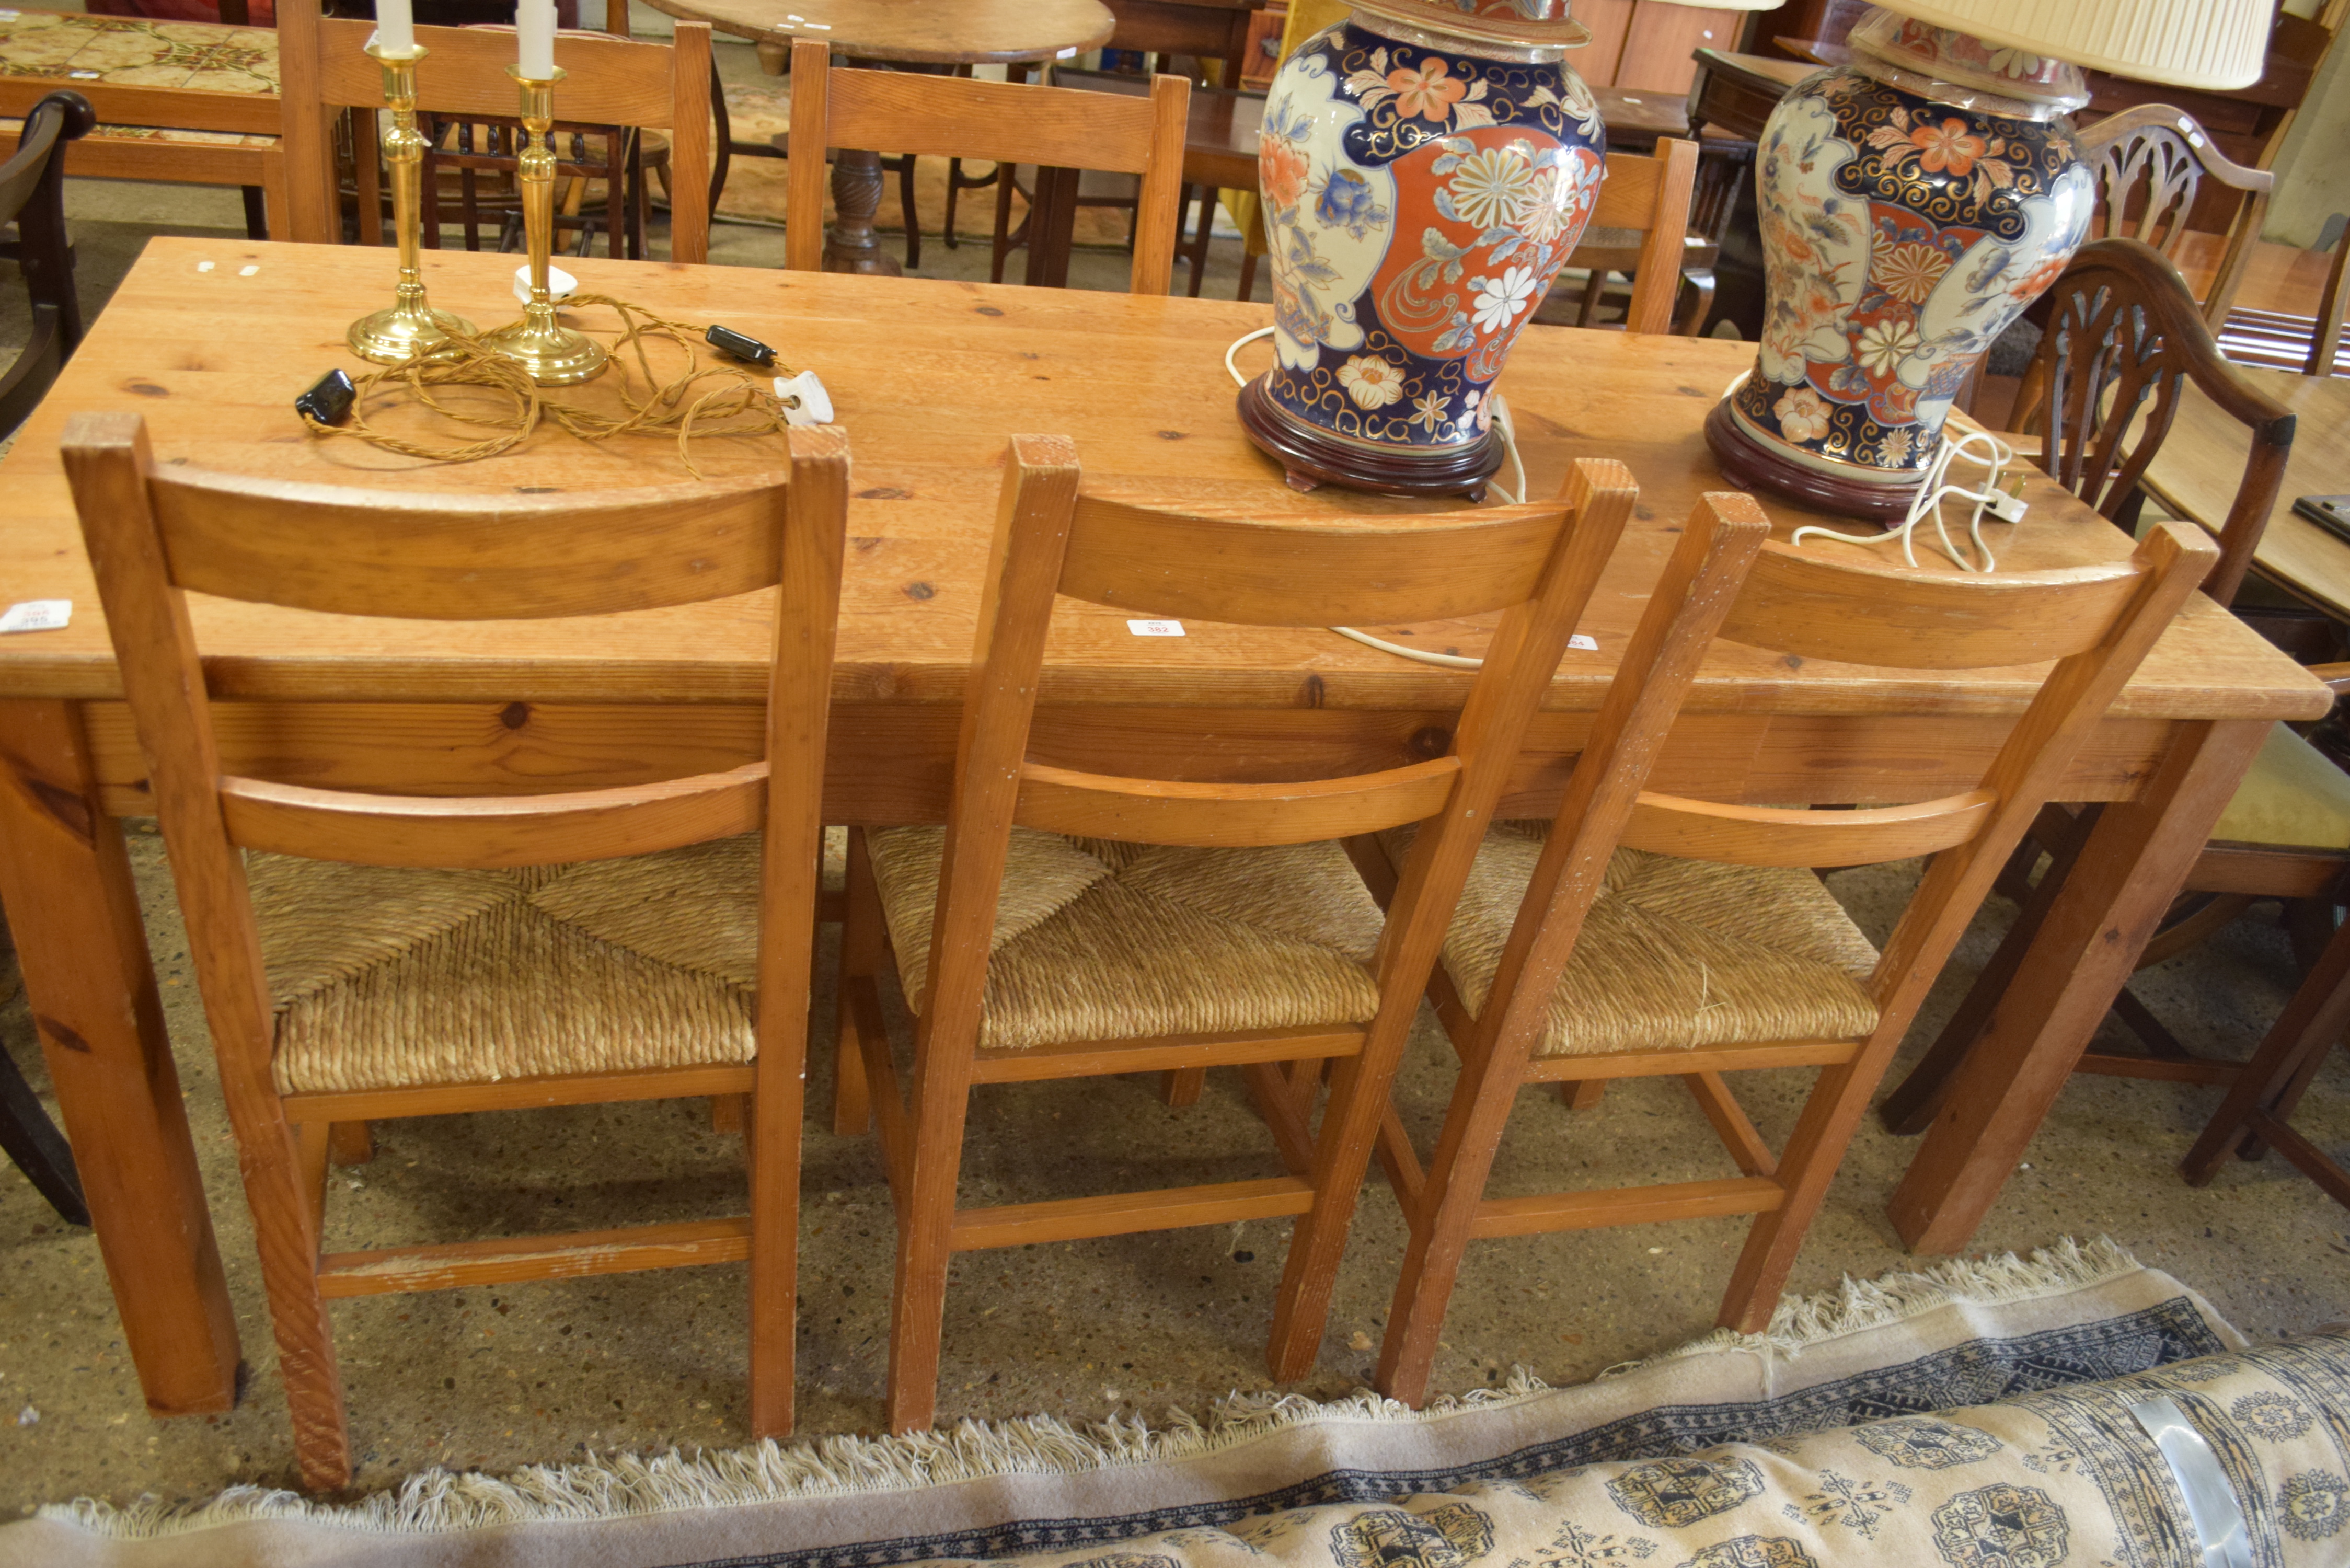 MODERN PINE KITCHEN TABLE AND SIX CHAIRS, TABLE 183CM LONG